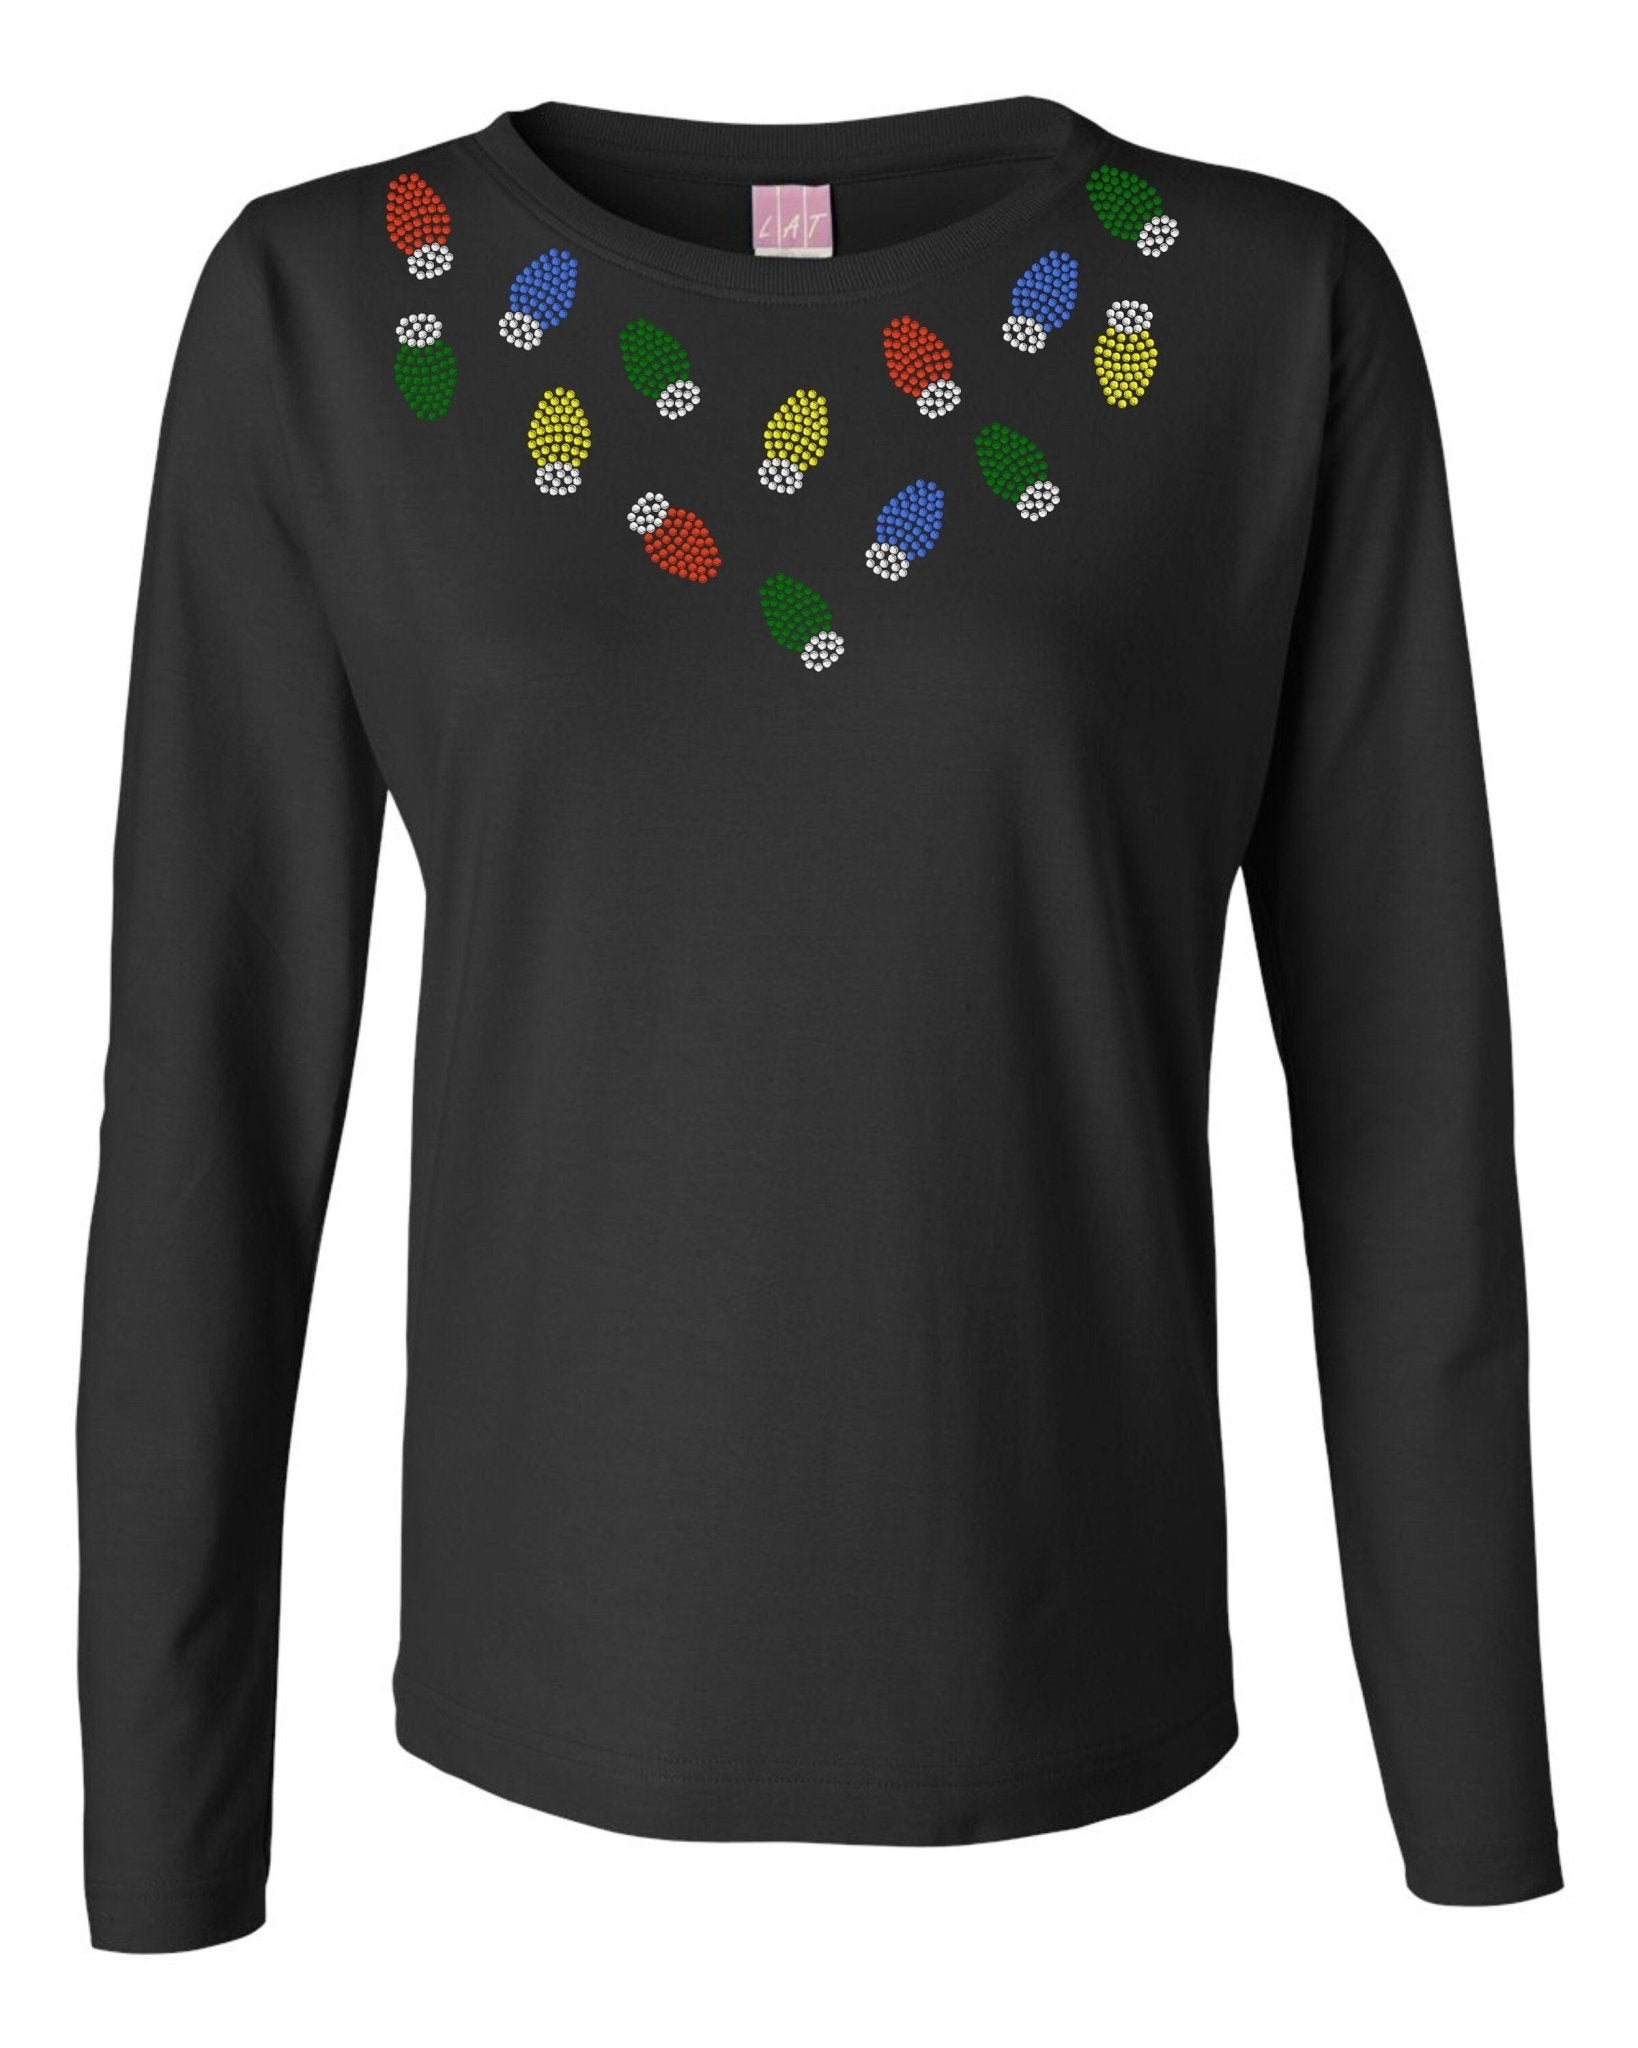 Christmas Lights Ladies long Sleeve Rhinestones T twinkle lights Christmas string lights xmas light bulb lite christmas party gift for her - SBS T Shop